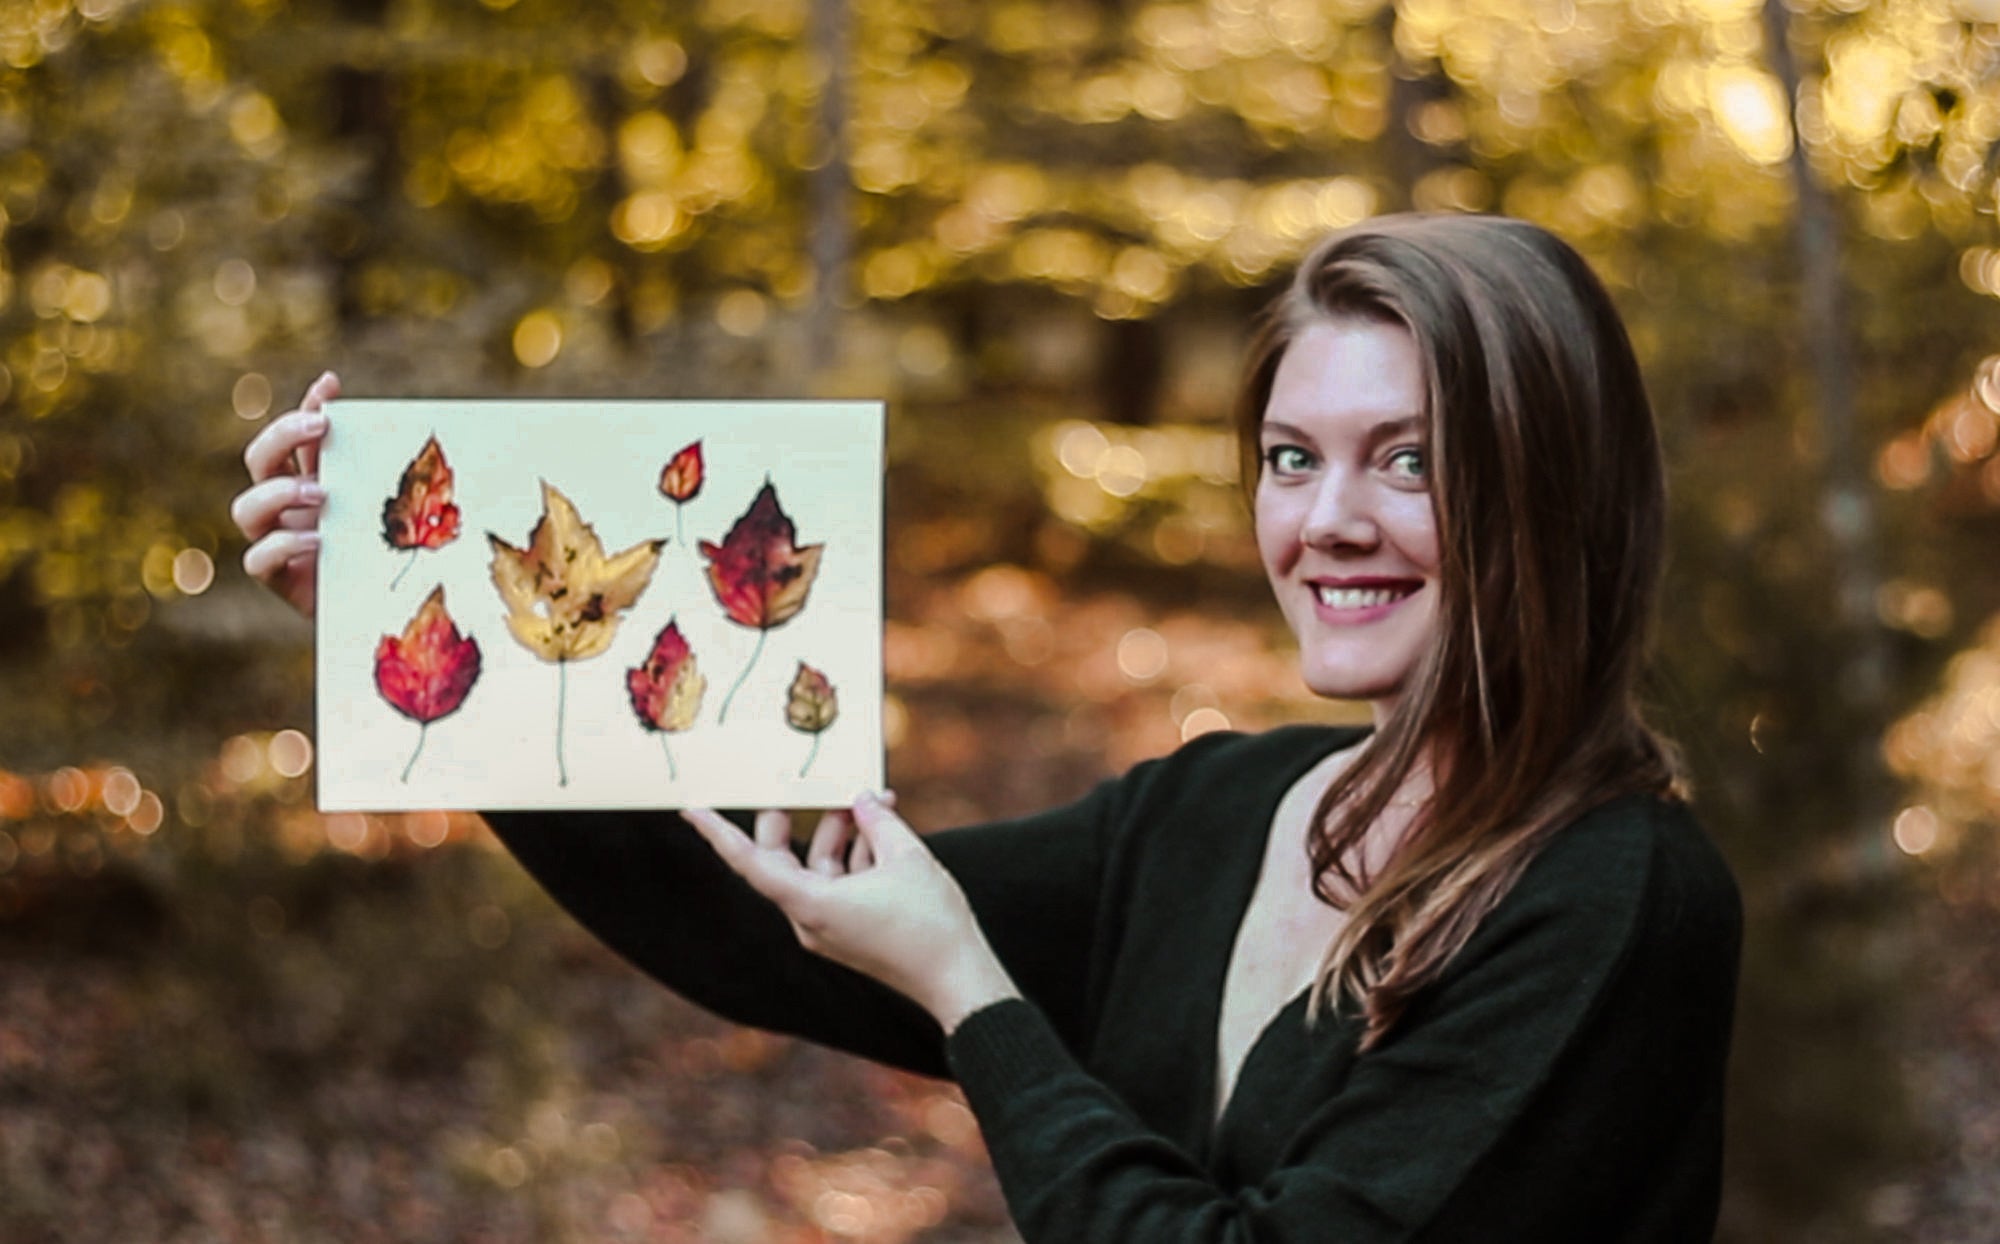 Courtney Hopkins holding up a painting of fall leaves